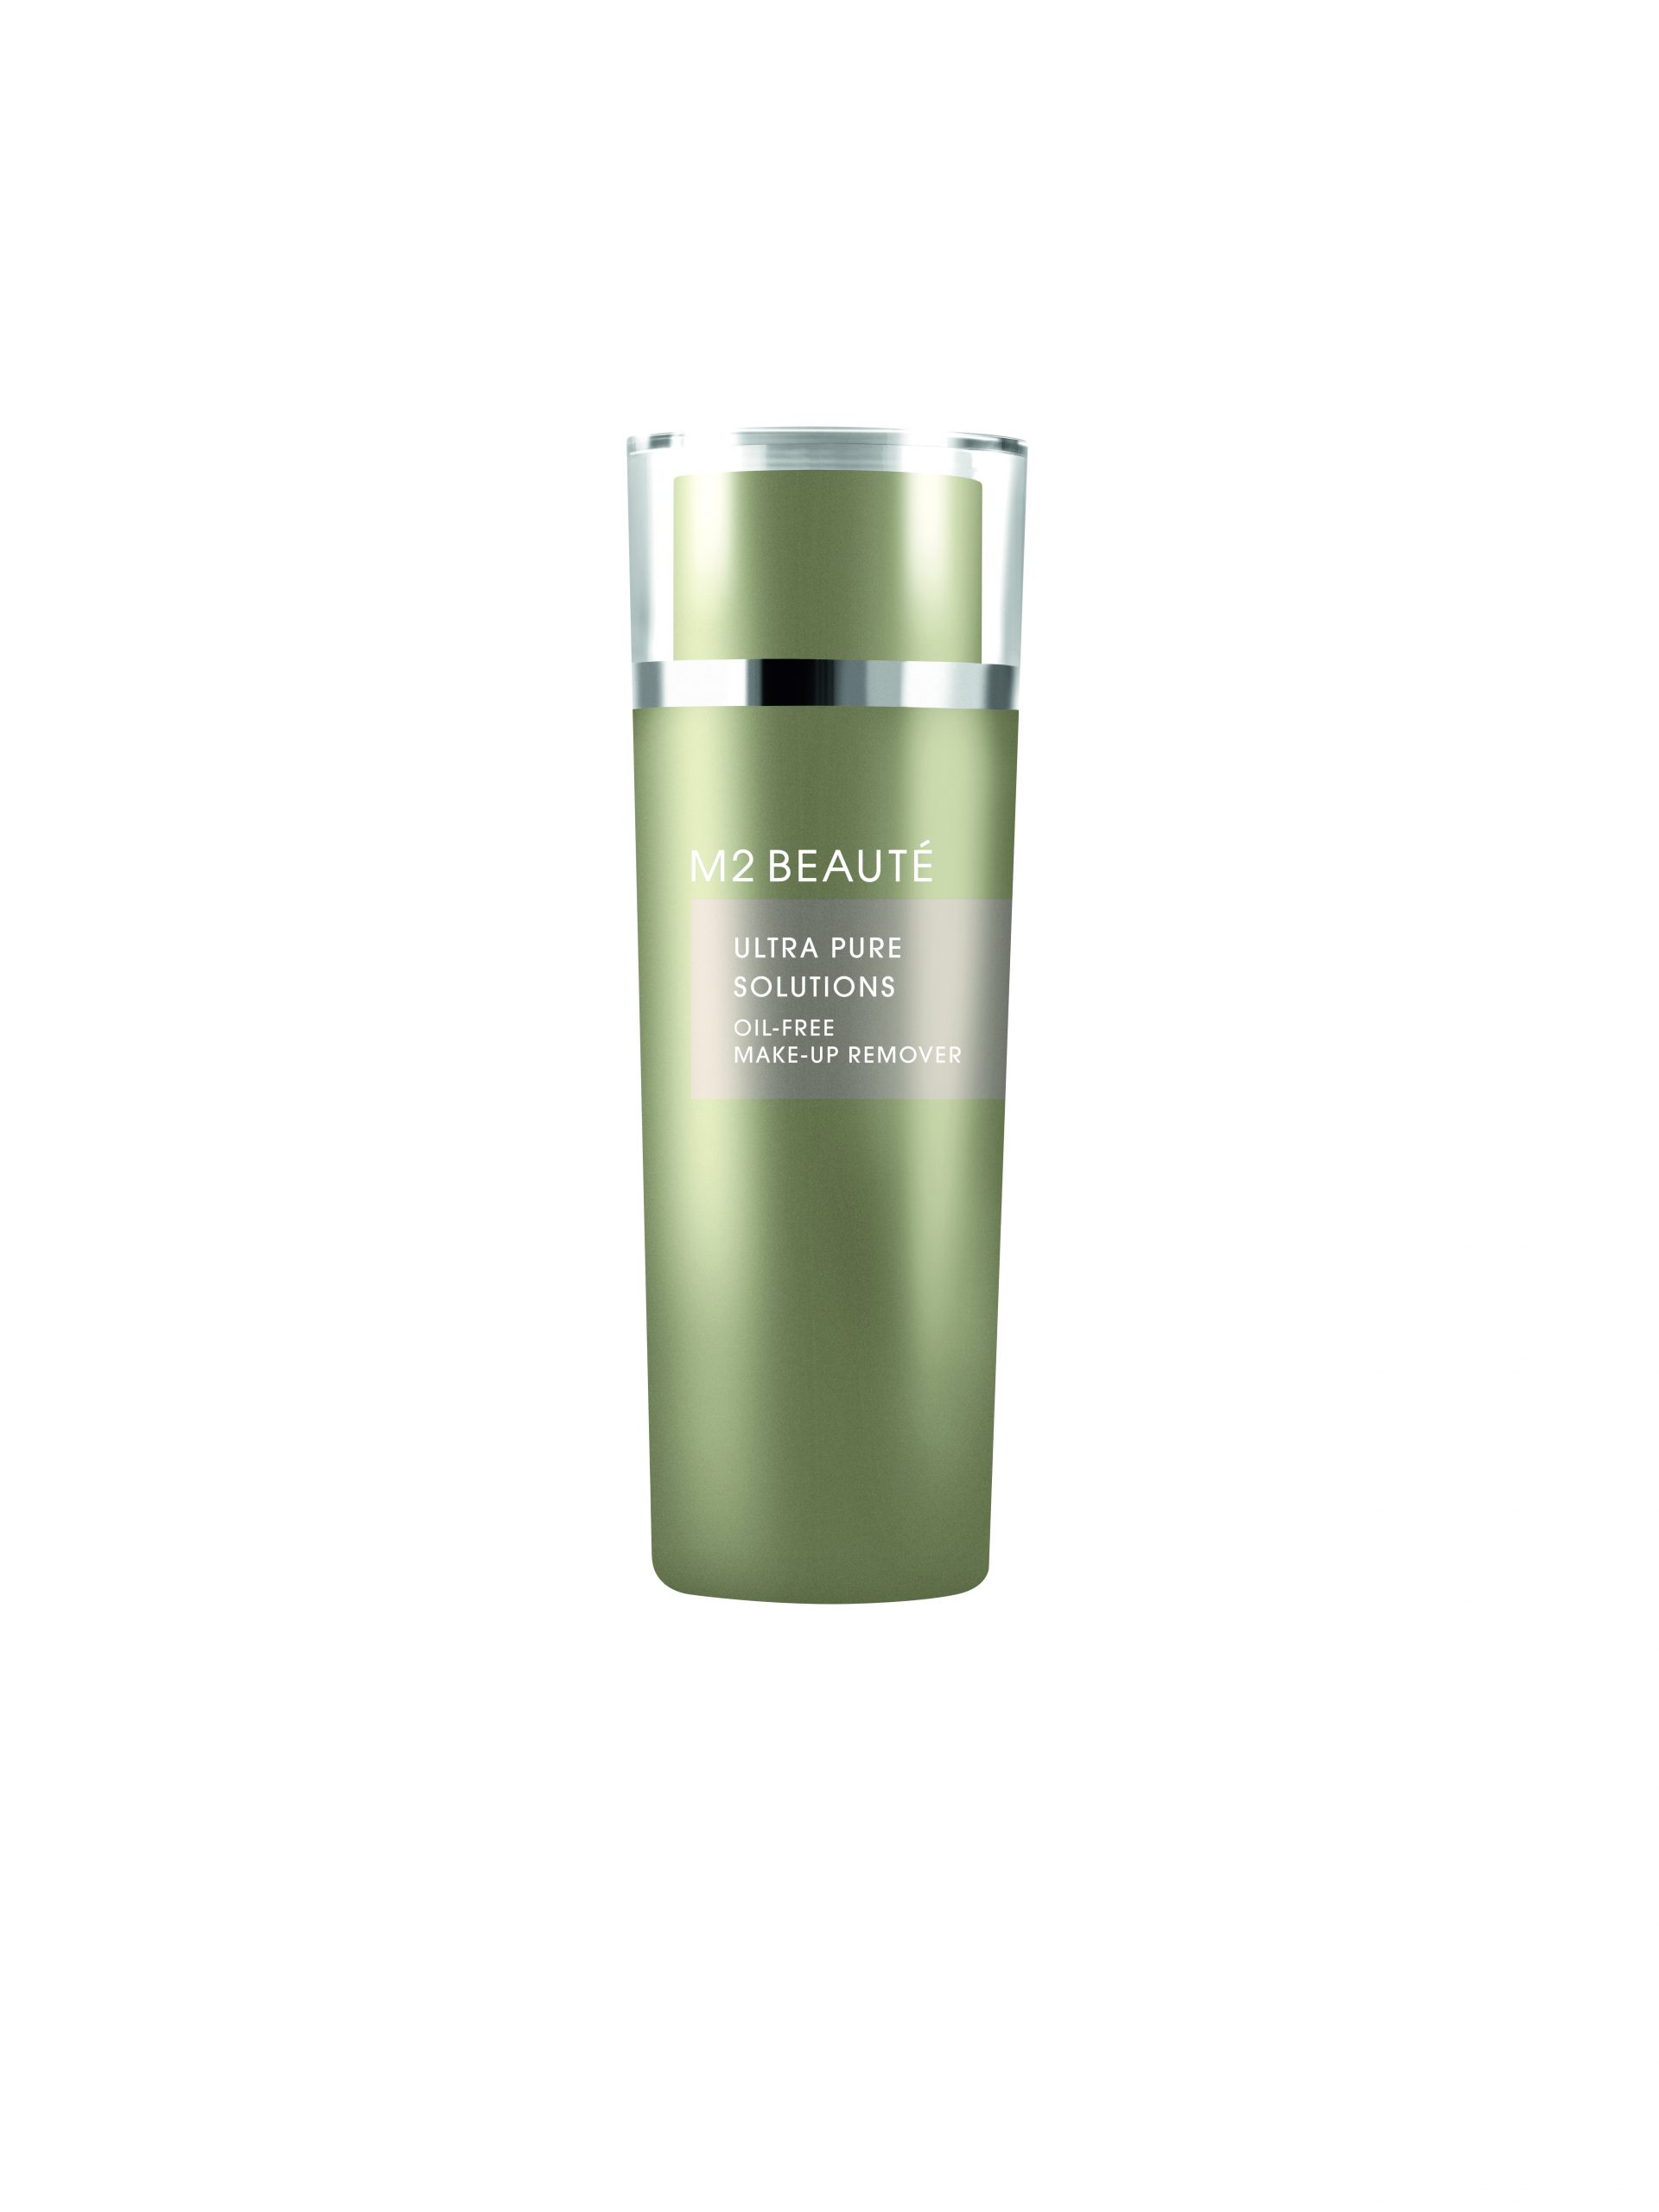 M2 Beaute Oil Free Make Up Remover